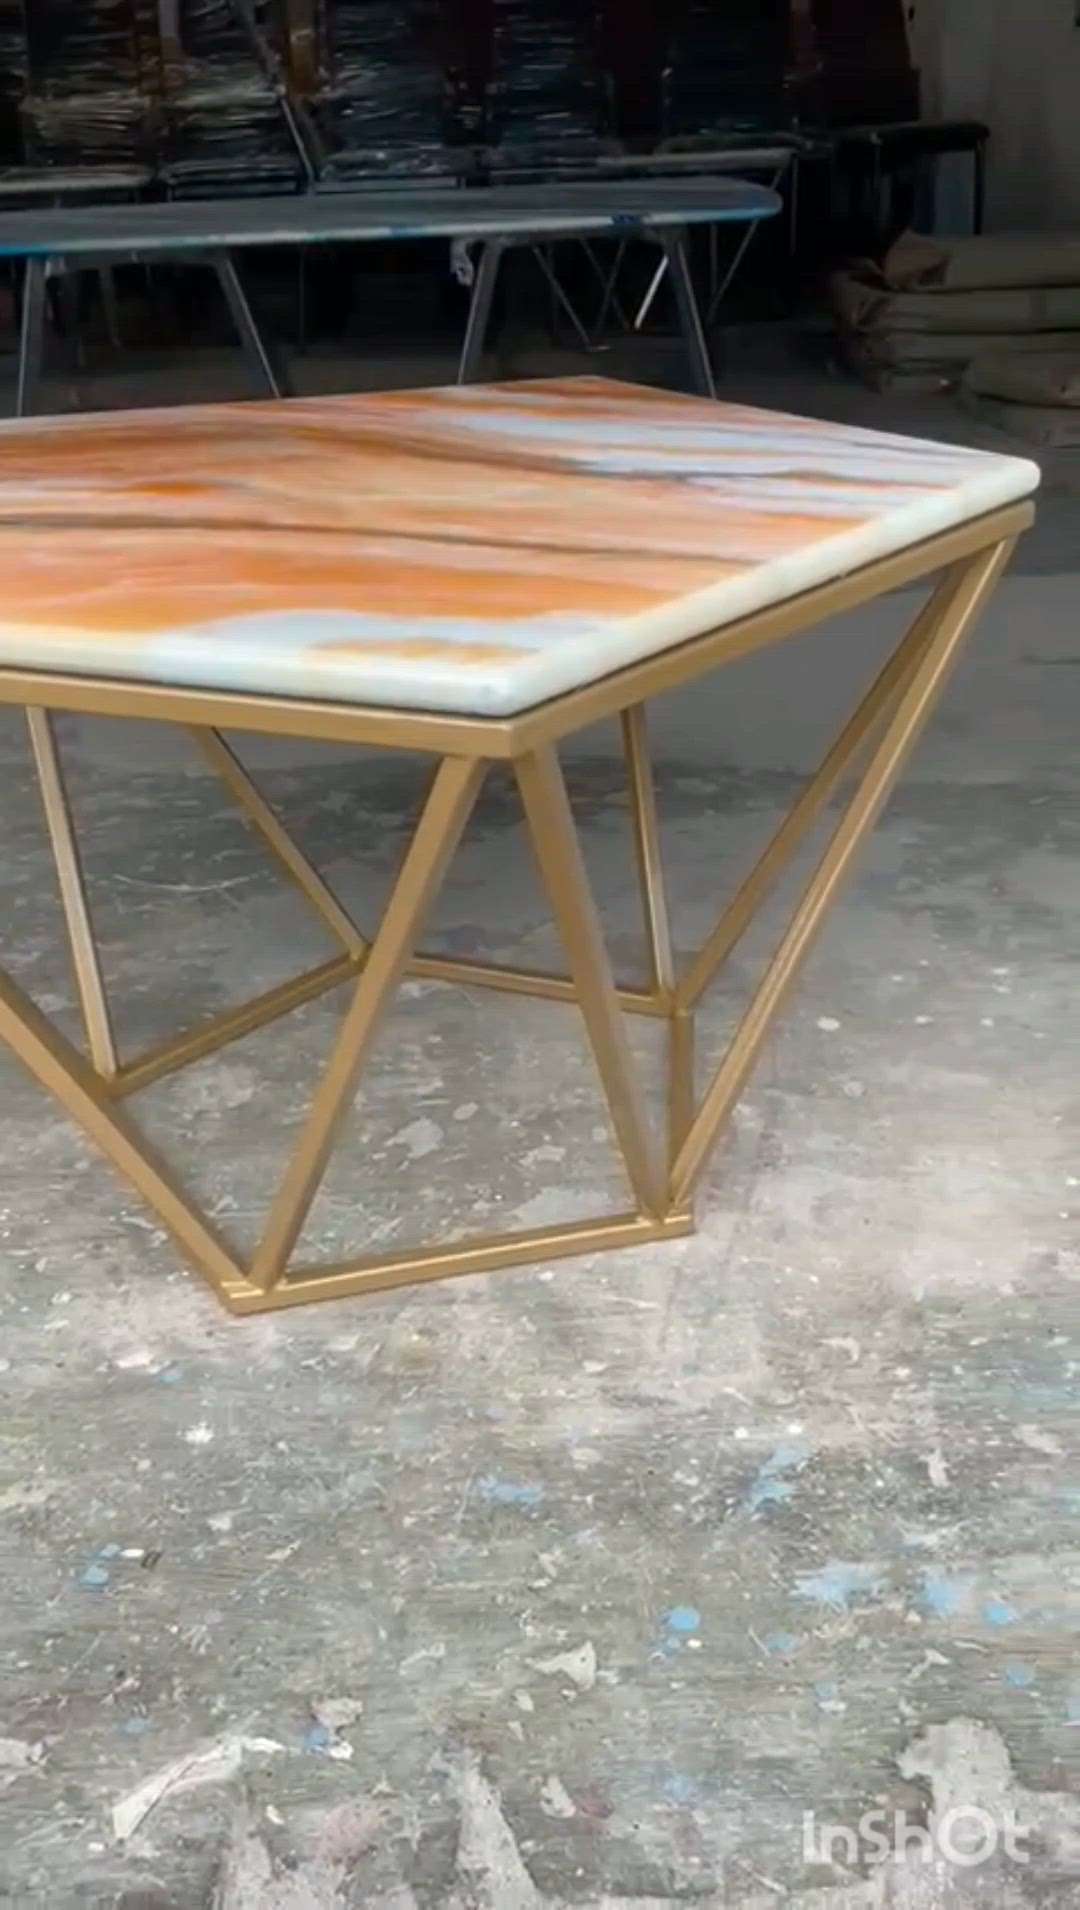 Tabletop manufacturers 
🔰Customisation available
🔰Engineered stone with epoxy
🔰Unlimited Color options
🔰 PU Coated
🔰Easy to maintain
🔰No plywood support needed
🔰27MM Thickness 

Contact: 9526008881
 #epoxy #epoxyresintable #epoxytables #epoxydining #epoxy #epoxyfurniture #epoxydiningtable #furnitures #furnitureanddiningtable #furniturework #furnituremanufacturer #furniturelastforlife #HomeDecor #homeinterior #homesweethome #homesweethome  #LivingRoomTable #LivingRoomDecoration #LivingRoomDecors #LivingRoomIdeas #OfficeRoom #office_table #offices #office&shopinterior #CoffeeTable #coffeetable💗 #coffeetabletop